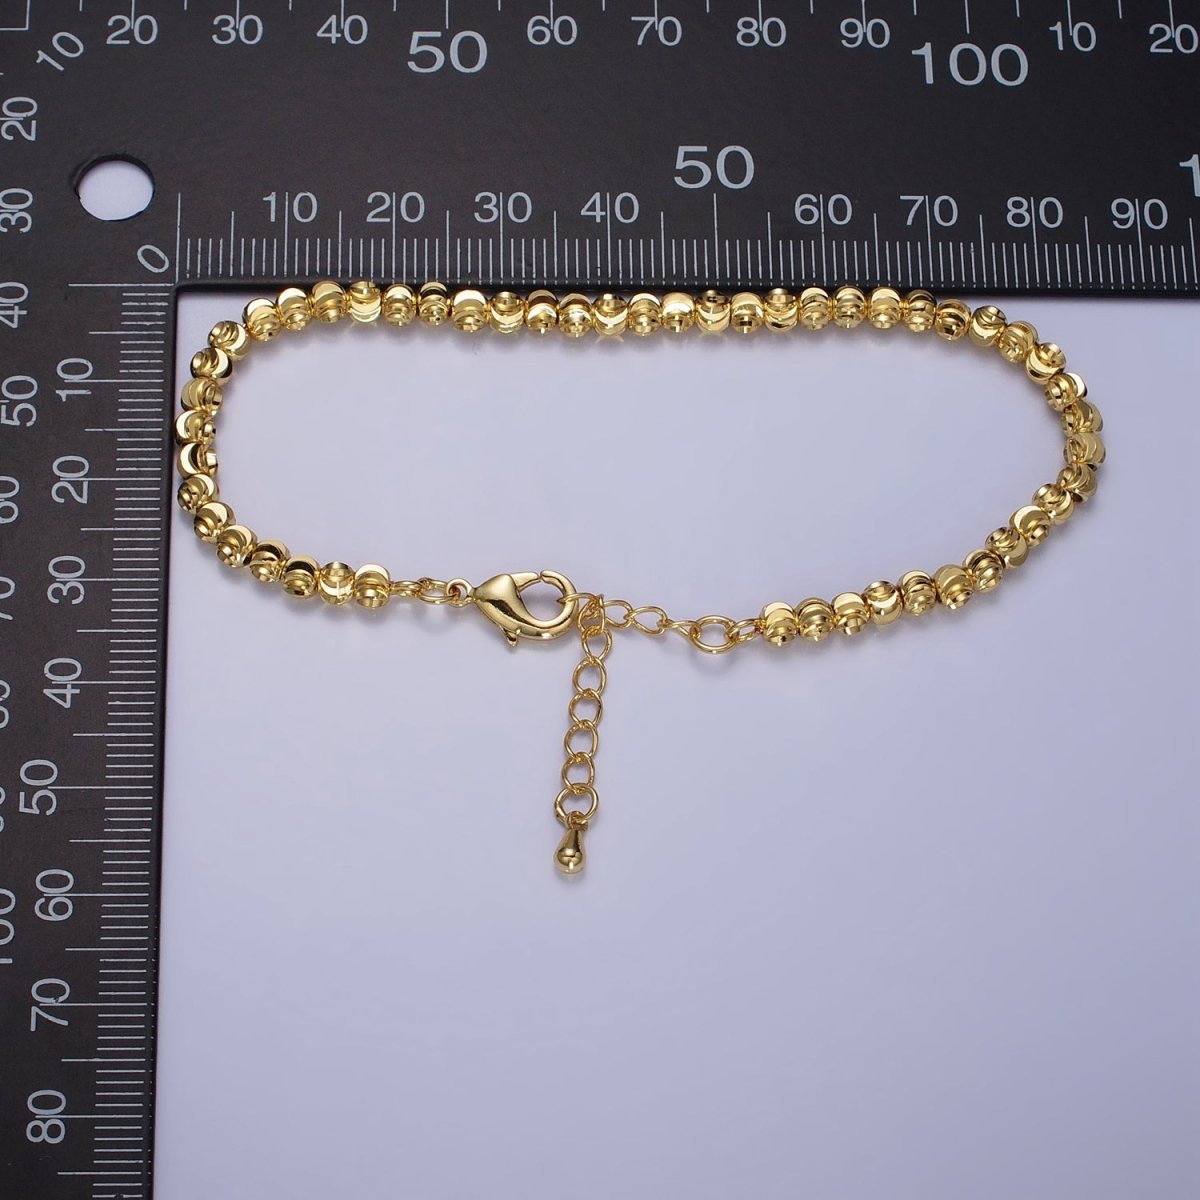 3.5mm, 2.5mm Sparkling Moon Cut Ball Beaded Ball Bracelet 7 Inch Chain Bracelet in Gold & Silver | WA-1576 - WA-1579 Clearance Pricing - DLUXCA